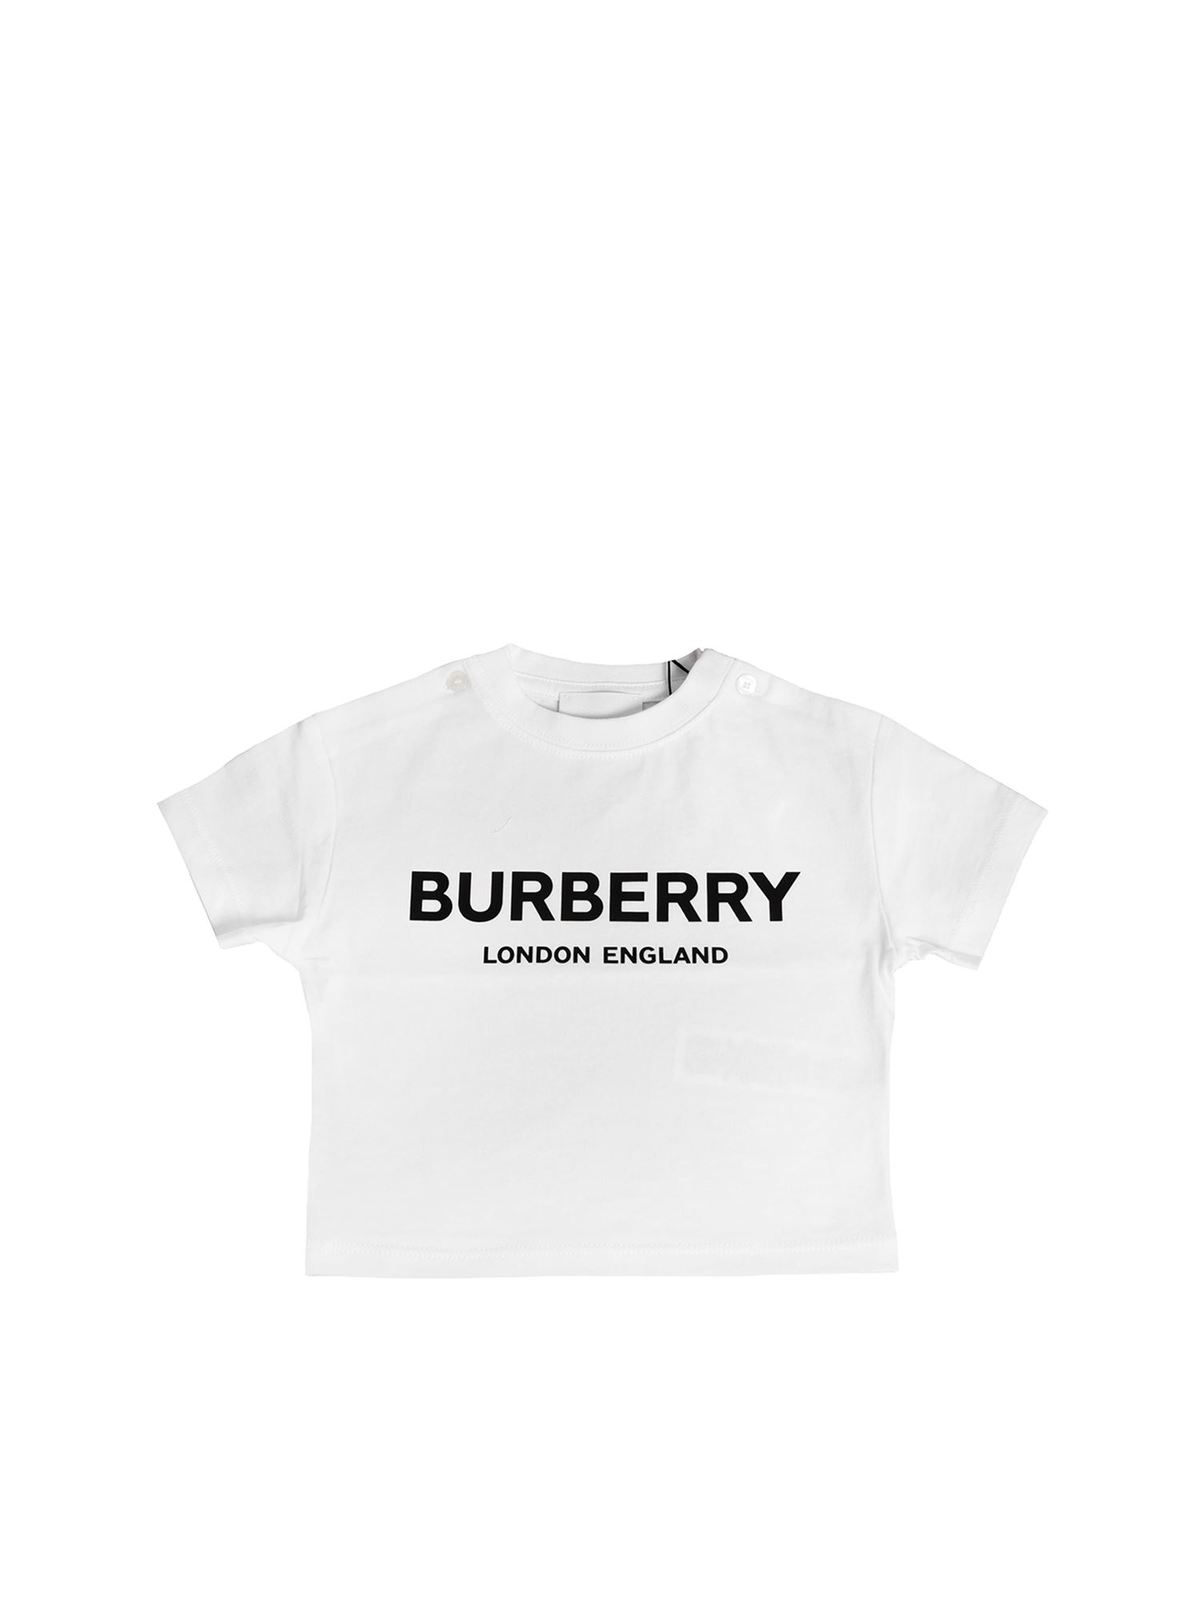 BURBERRY MINI ROBBIE T-SHIRT IN WHITE WITH LOGO PRINT